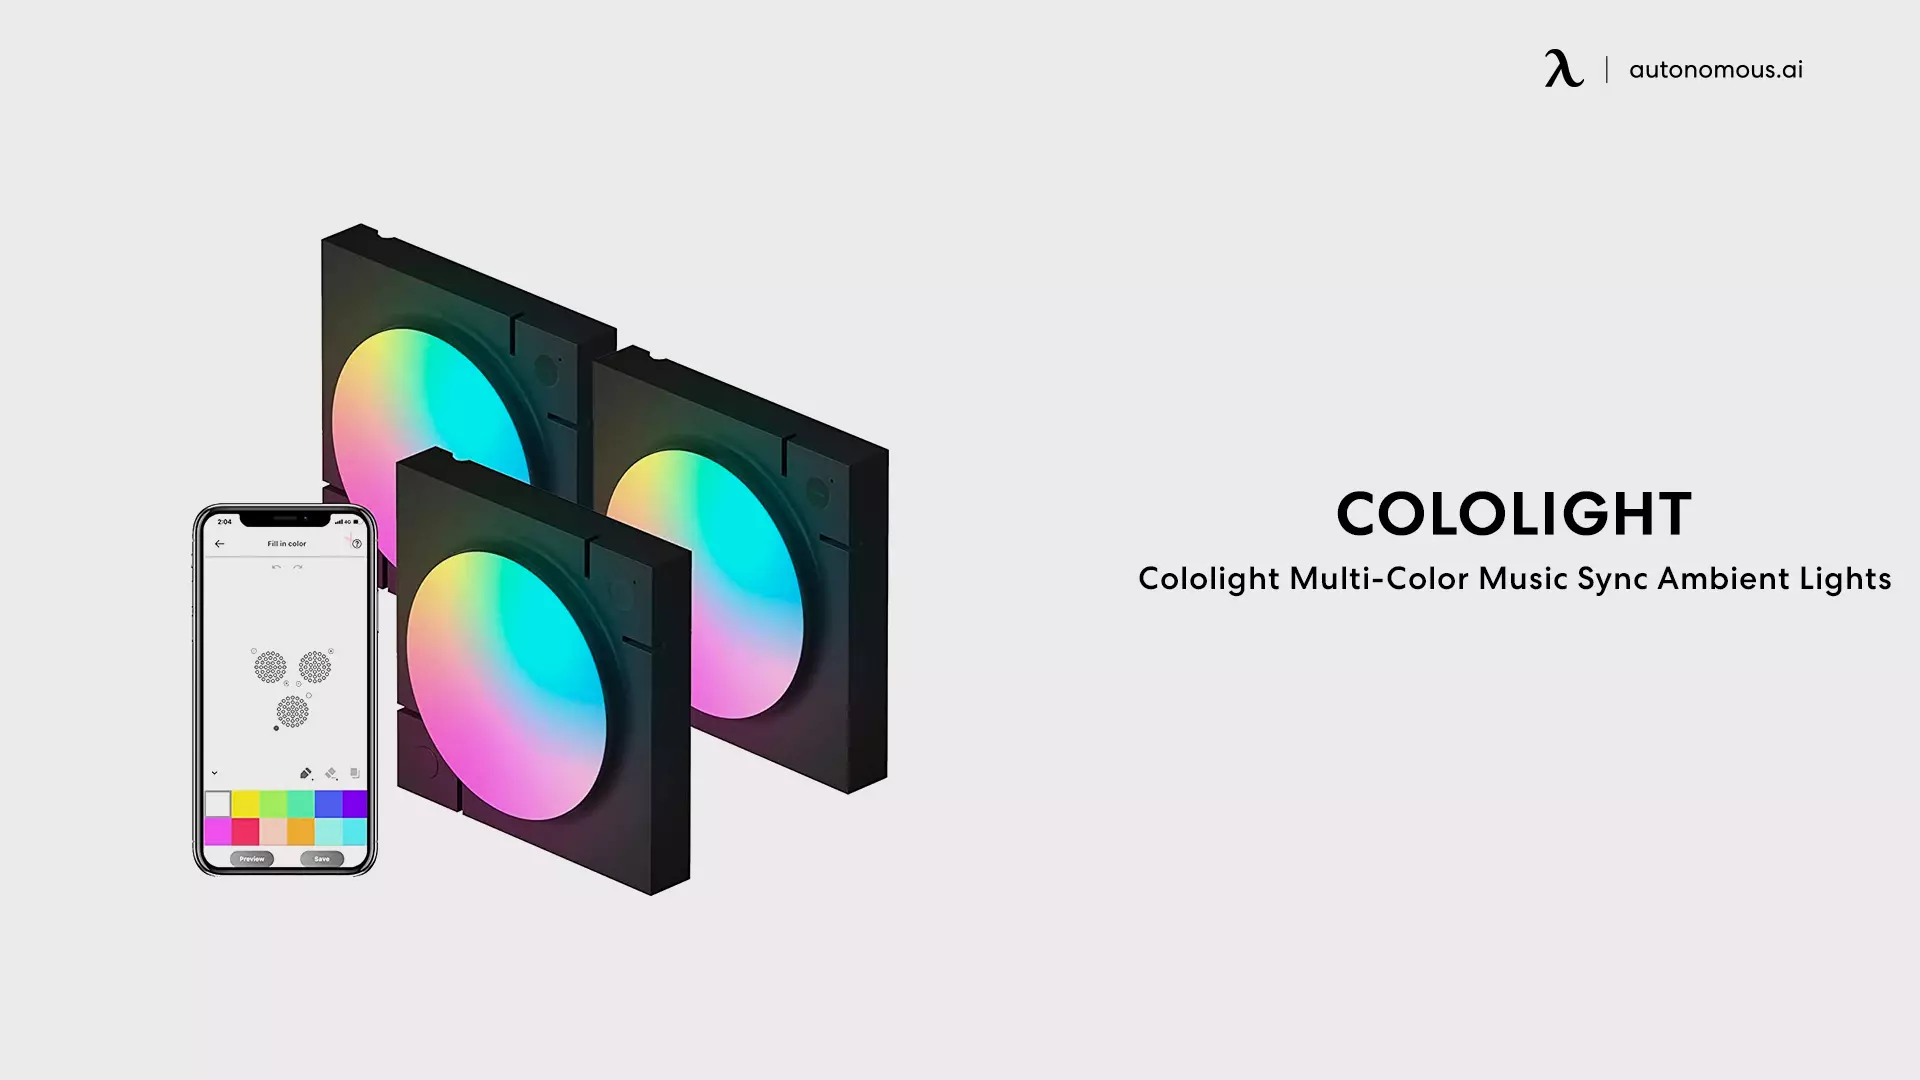 Cololight Multi-Color Music Sync Ambient Lights